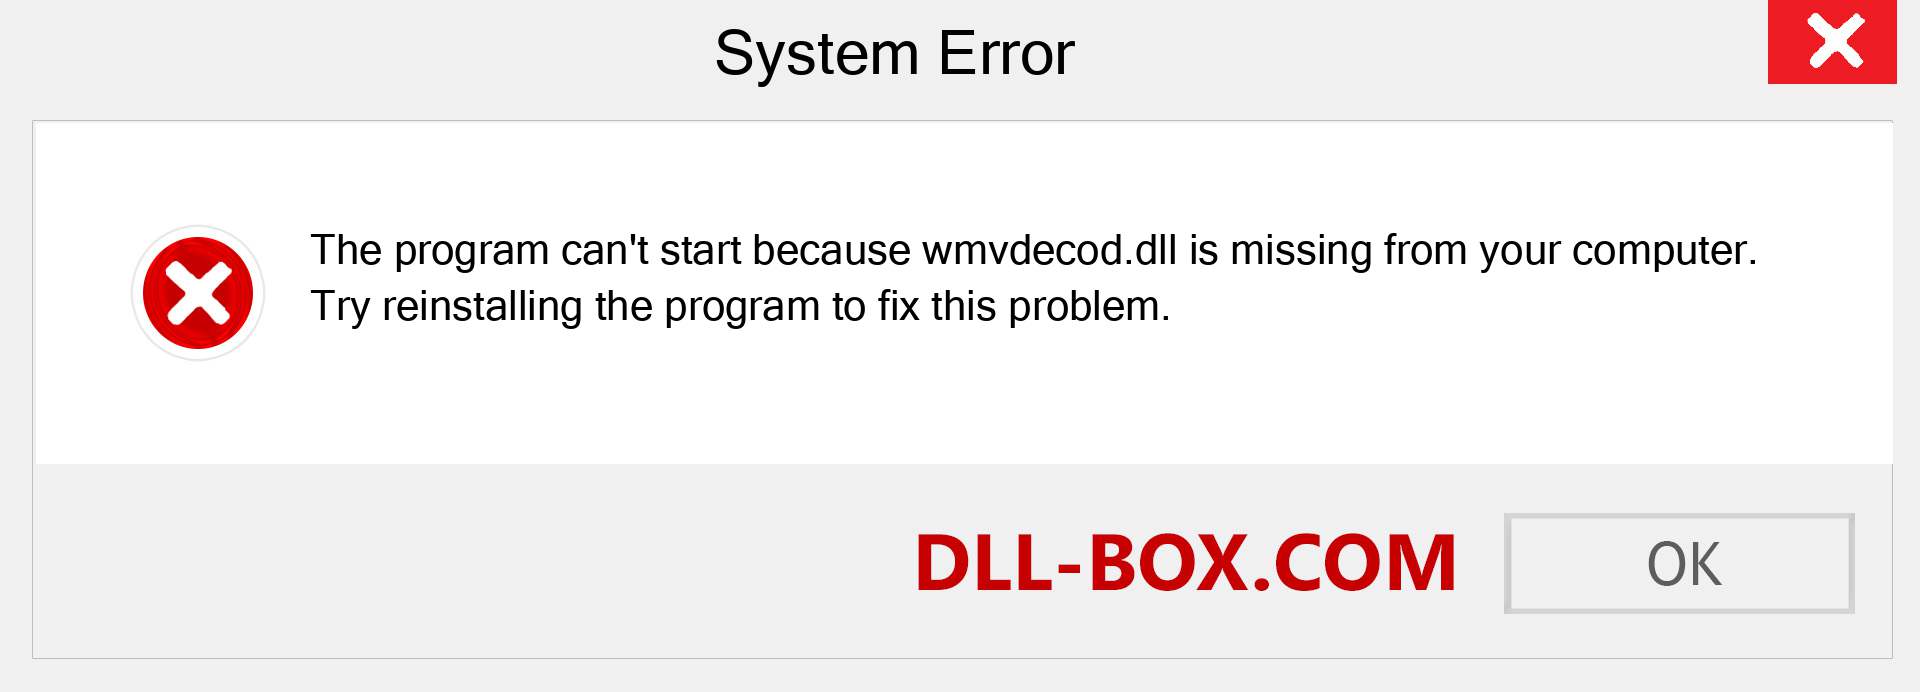  wmvdecod.dll file is missing?. Download for Windows 7, 8, 10 - Fix  wmvdecod dll Missing Error on Windows, photos, images